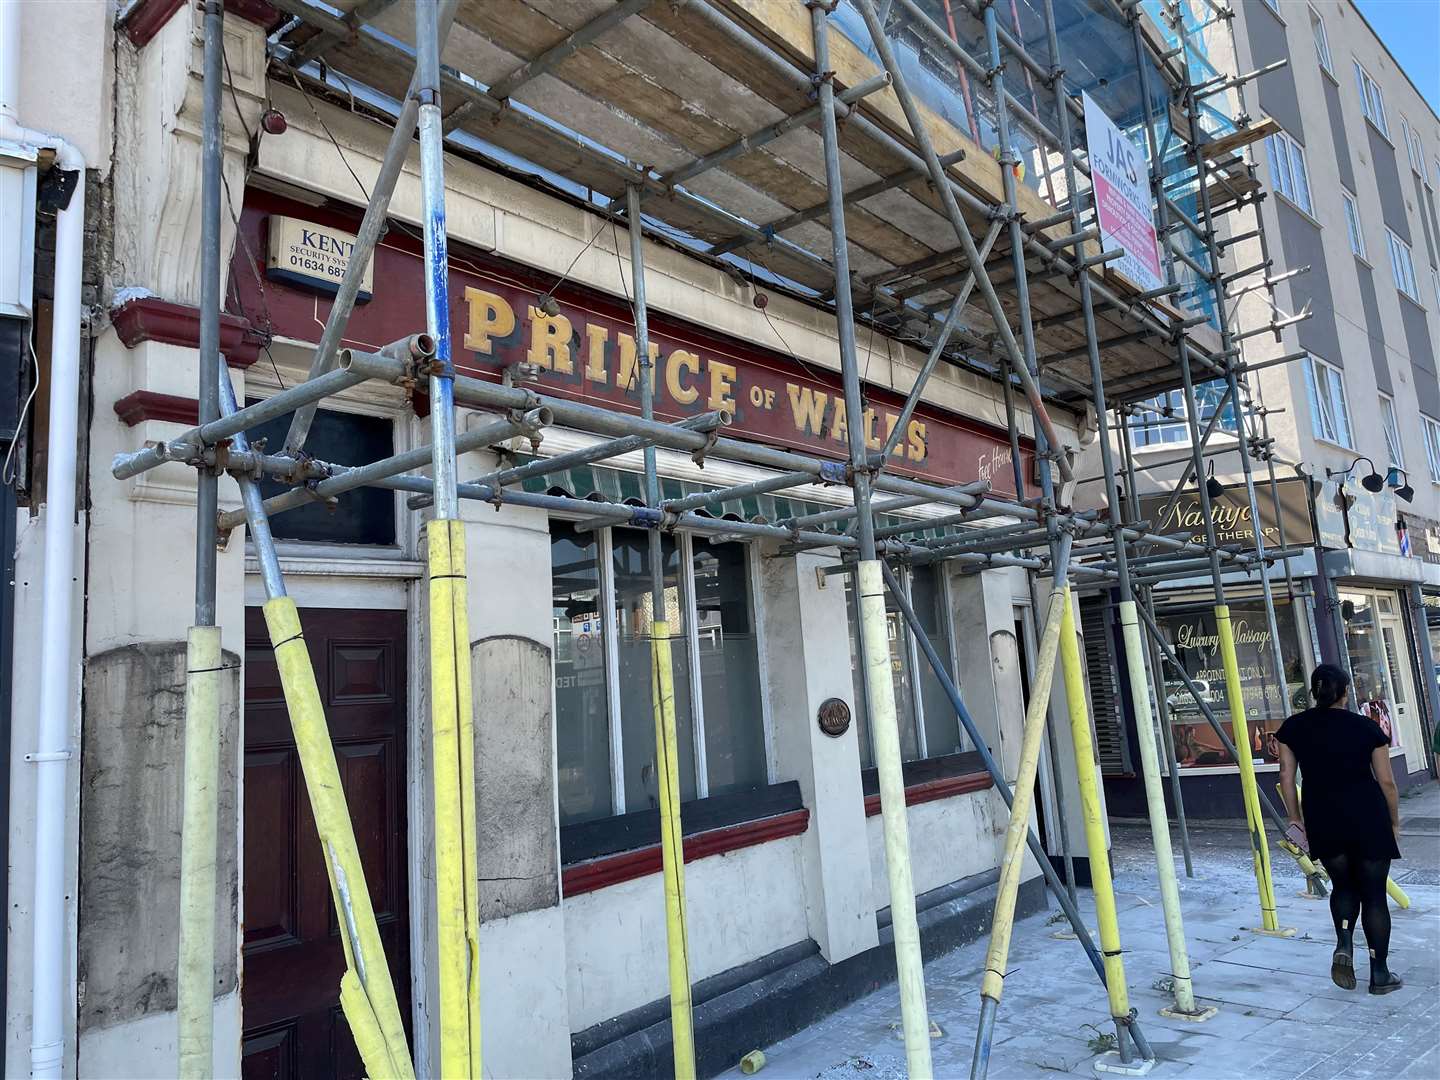 Work has started on the former pub